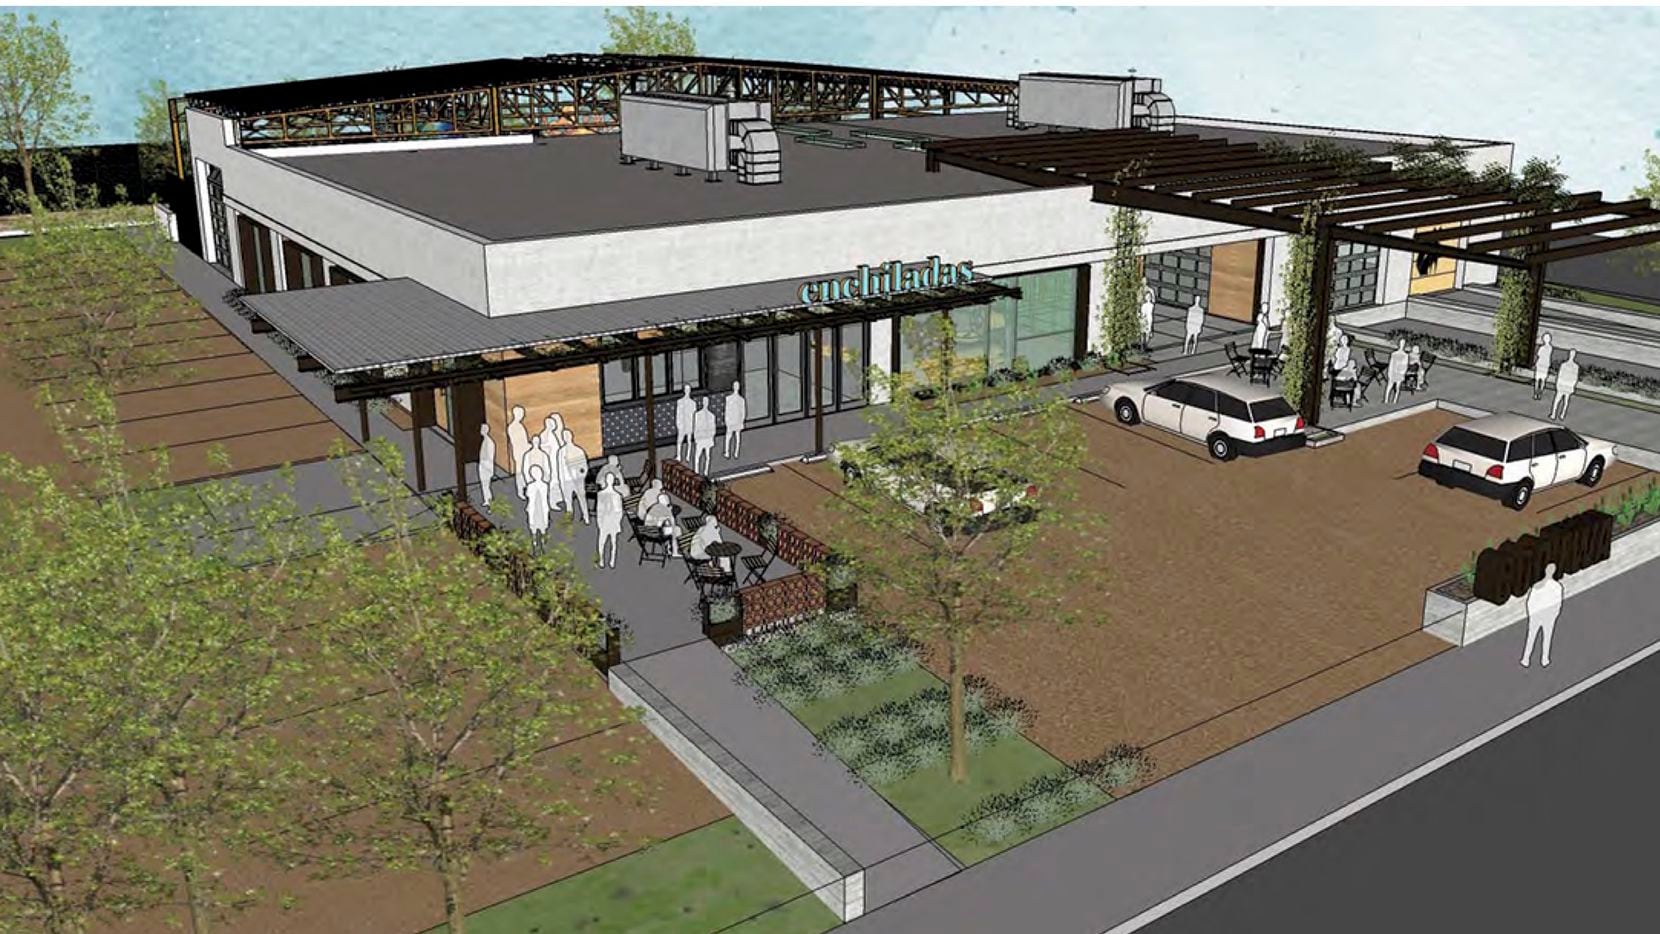 The Fort Worth Avenue redevelopment will include retail and restaurant space.